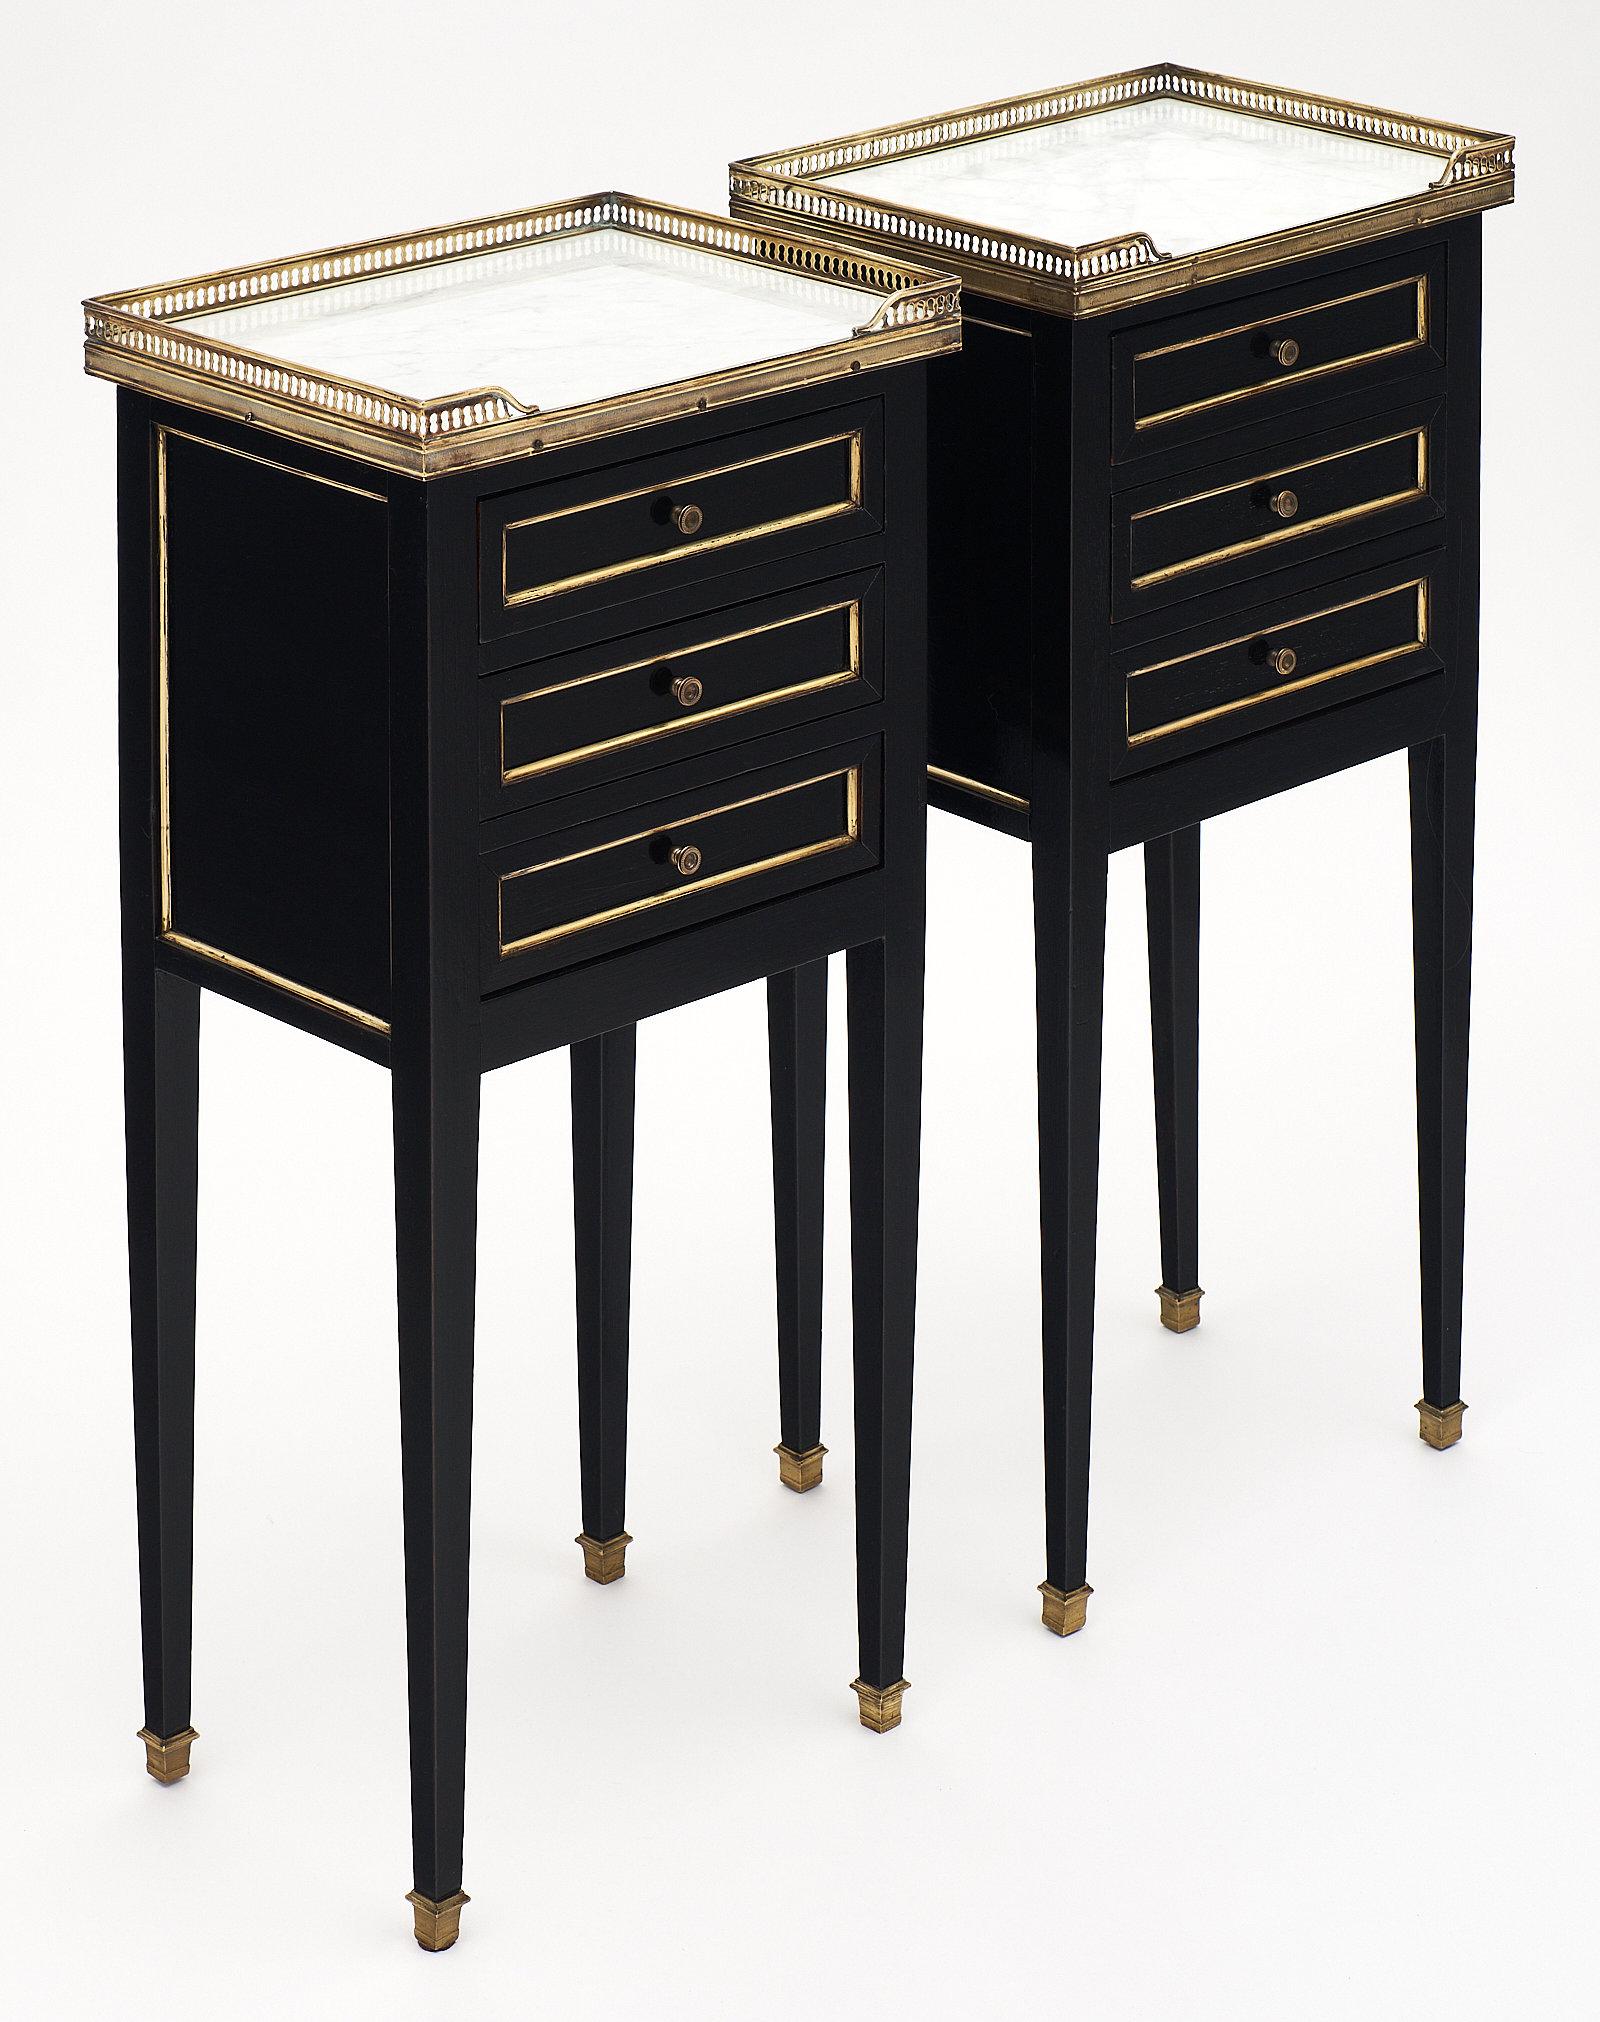 Carrara marble topped Louis XVI style side tables with brass gallery and trim. The mahogany tables have been ebonized and finished with a French polish for luster. The Carrara marble is original to the pair. We love the long tapered legs, and